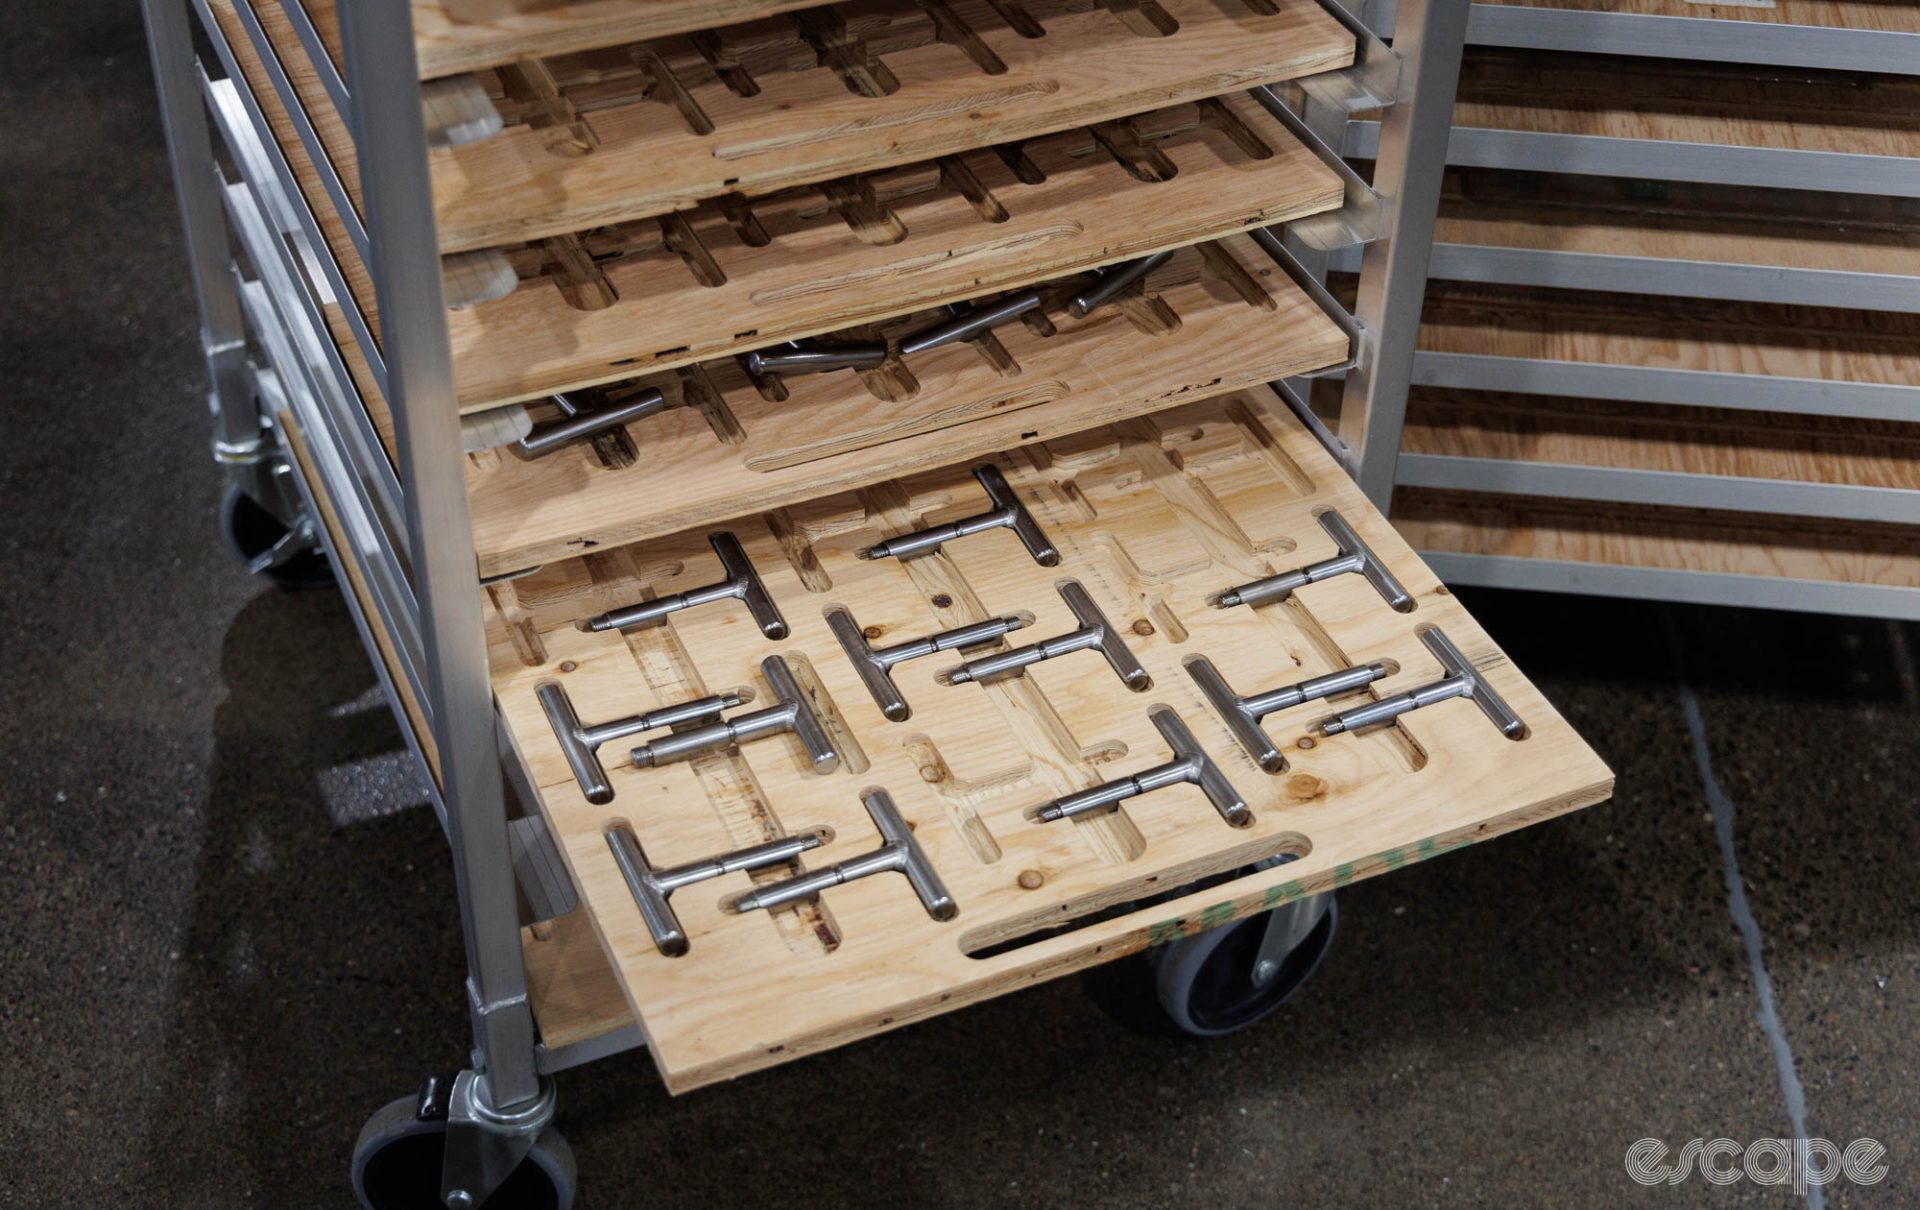 A rolling rack features rows of wood trays with cutouts to fit specific tools.